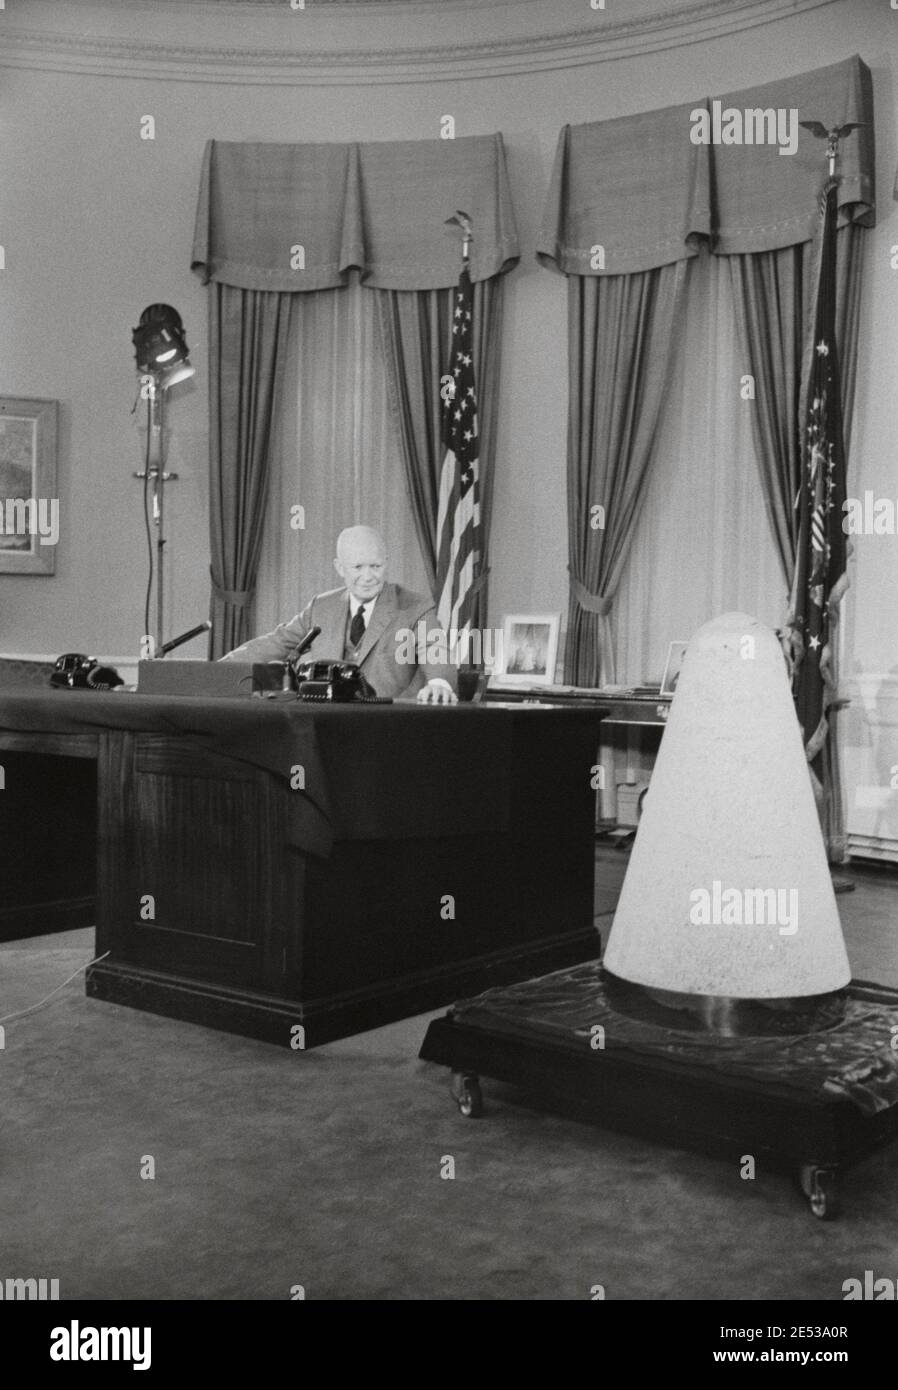 President Dwight Eisenhower giving a television speech in the White House about science and national security, next to a nose cone of an experimental Stock Photo